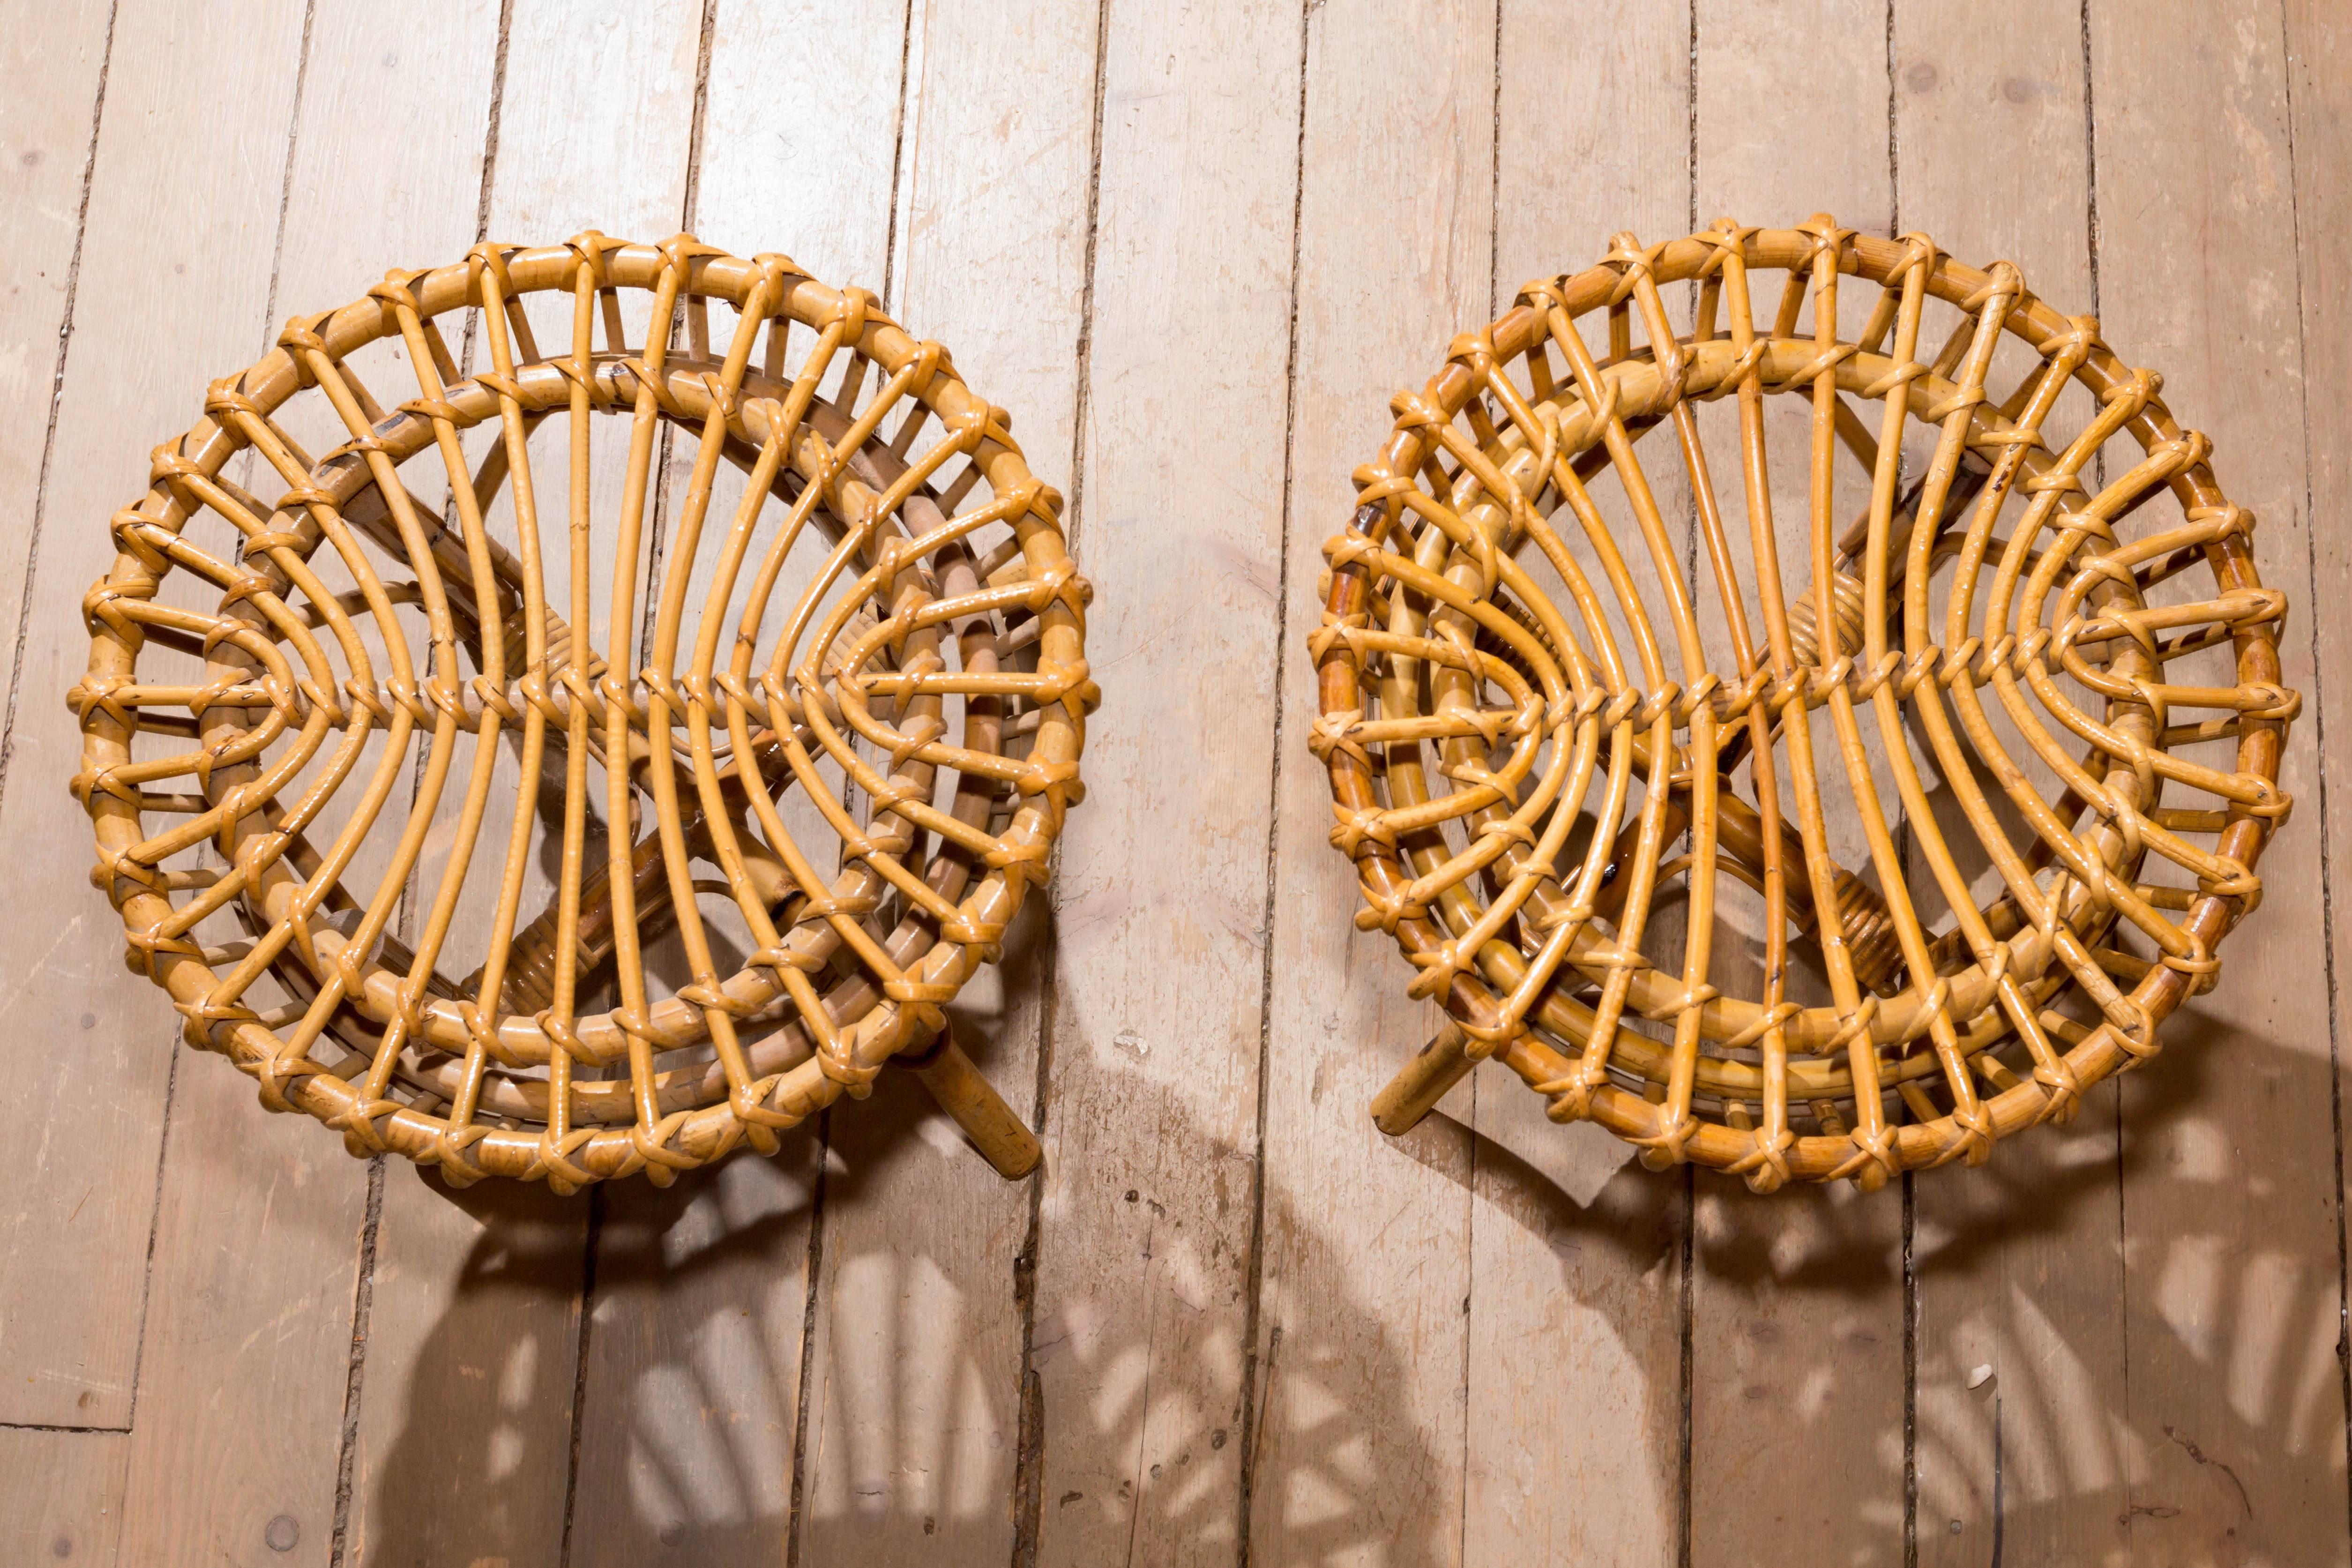 Pair of vintage bamboo stools.